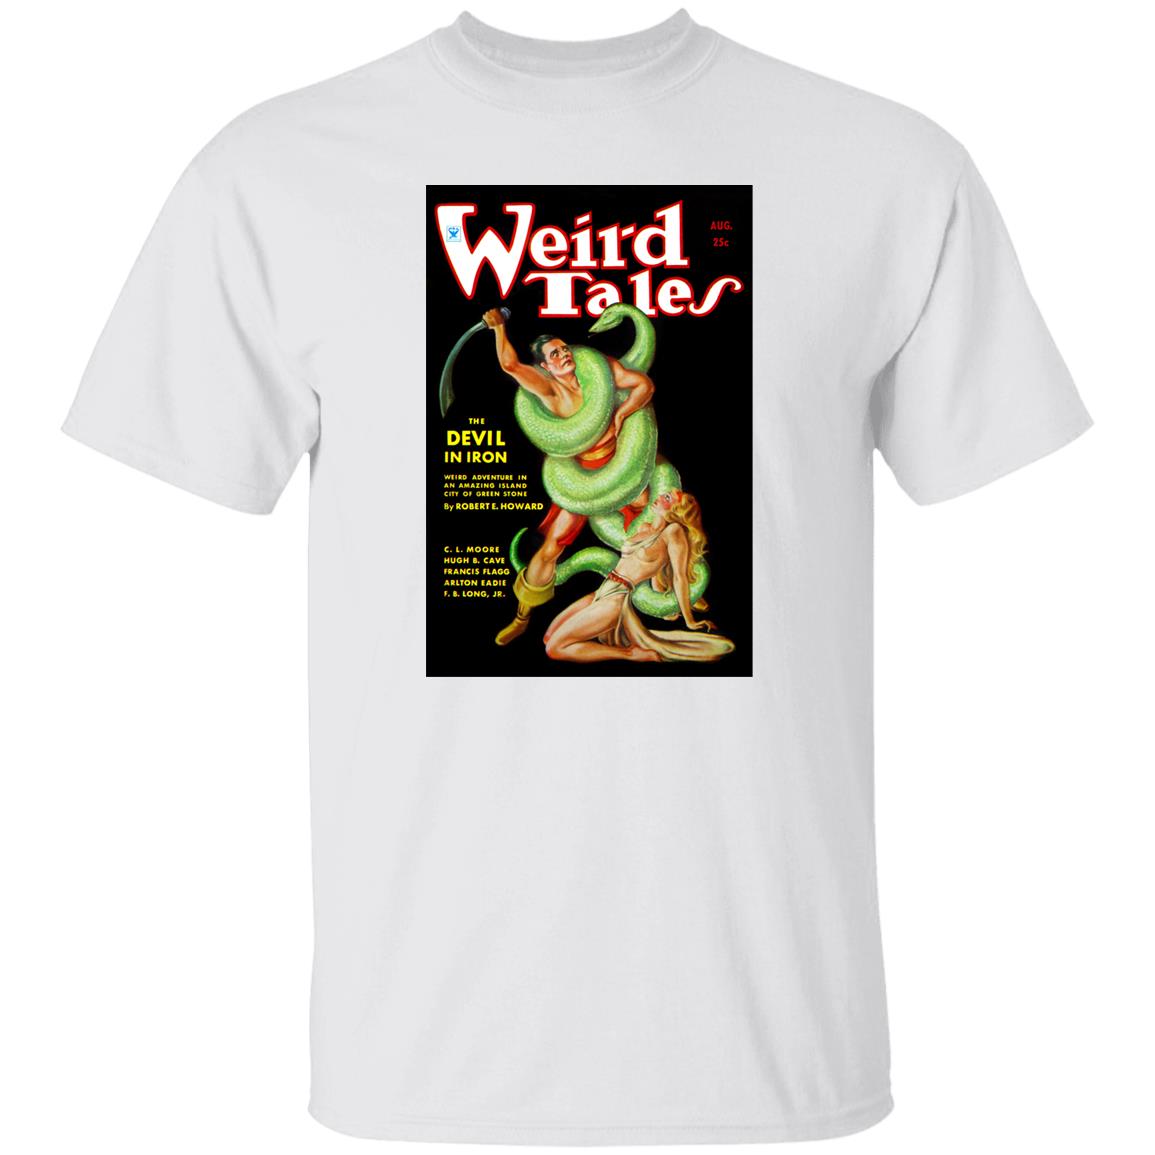 Weird Tales Cover Art August 1934 "The Devil in Iron" T-Shirt